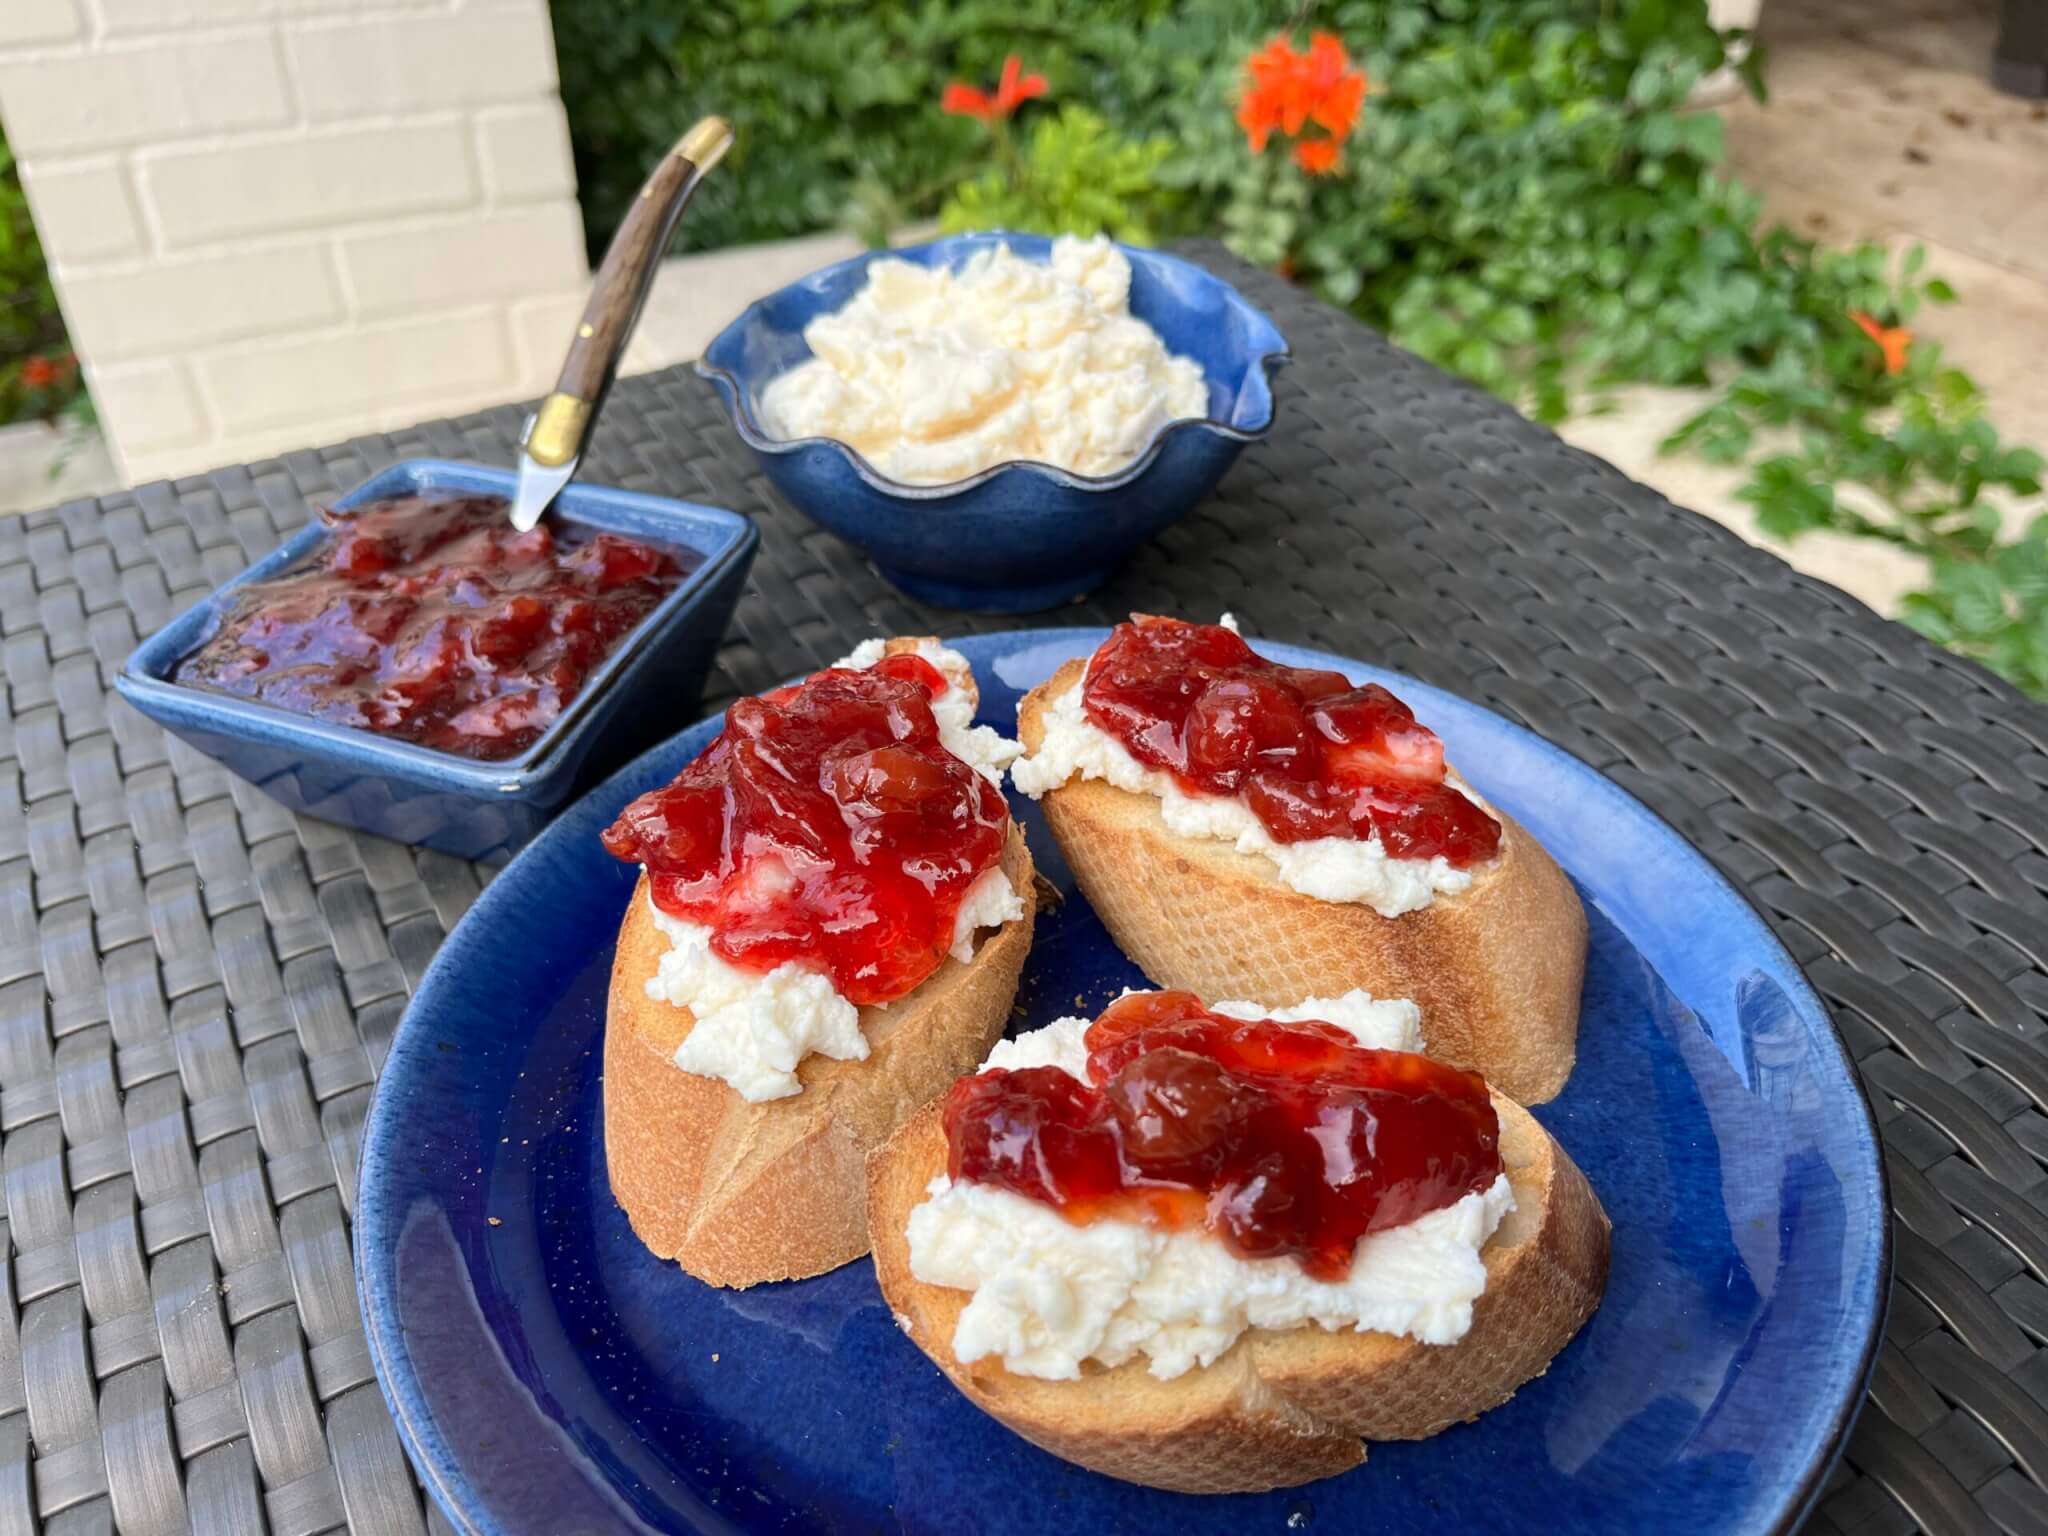 New Canaan Farms Cherry Preserves on home-made ricotta and toasted bread